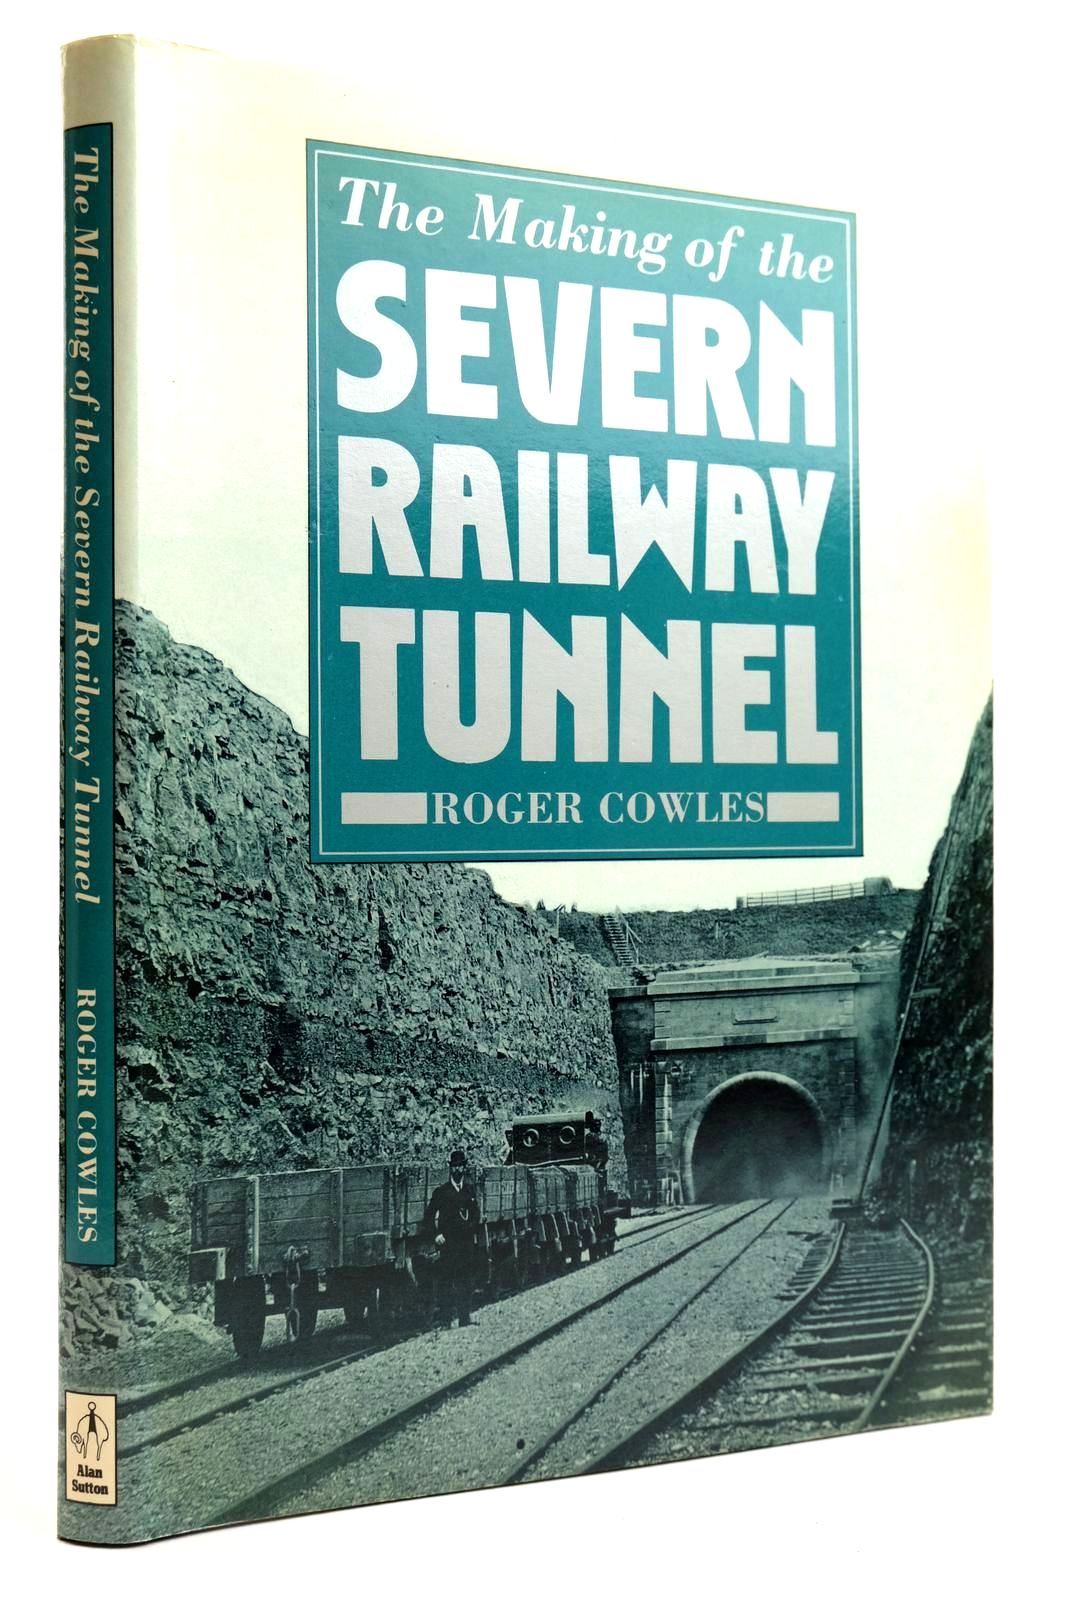 Photo of THE MAKING OF THE SEVERN RAILWAY TUNNEL written by Cowles, Roger published by Alan Sutton (STOCK CODE: 2132500)  for sale by Stella & Rose's Books